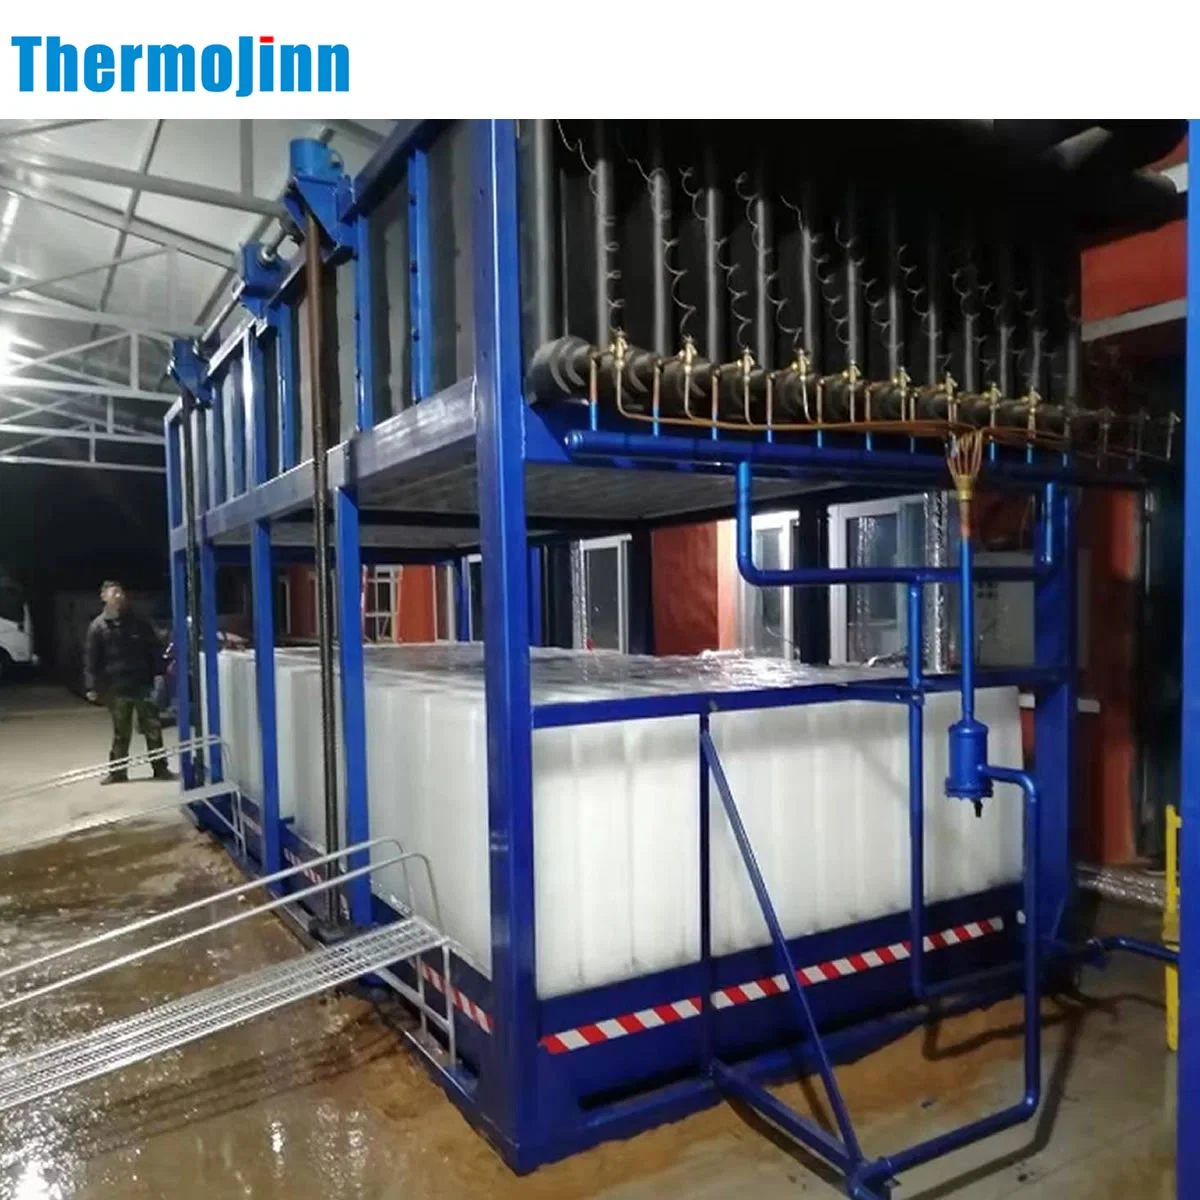 Thermojinn 20tons Industrial Block Ice Maker for Engineering Construction Ice Block Machine